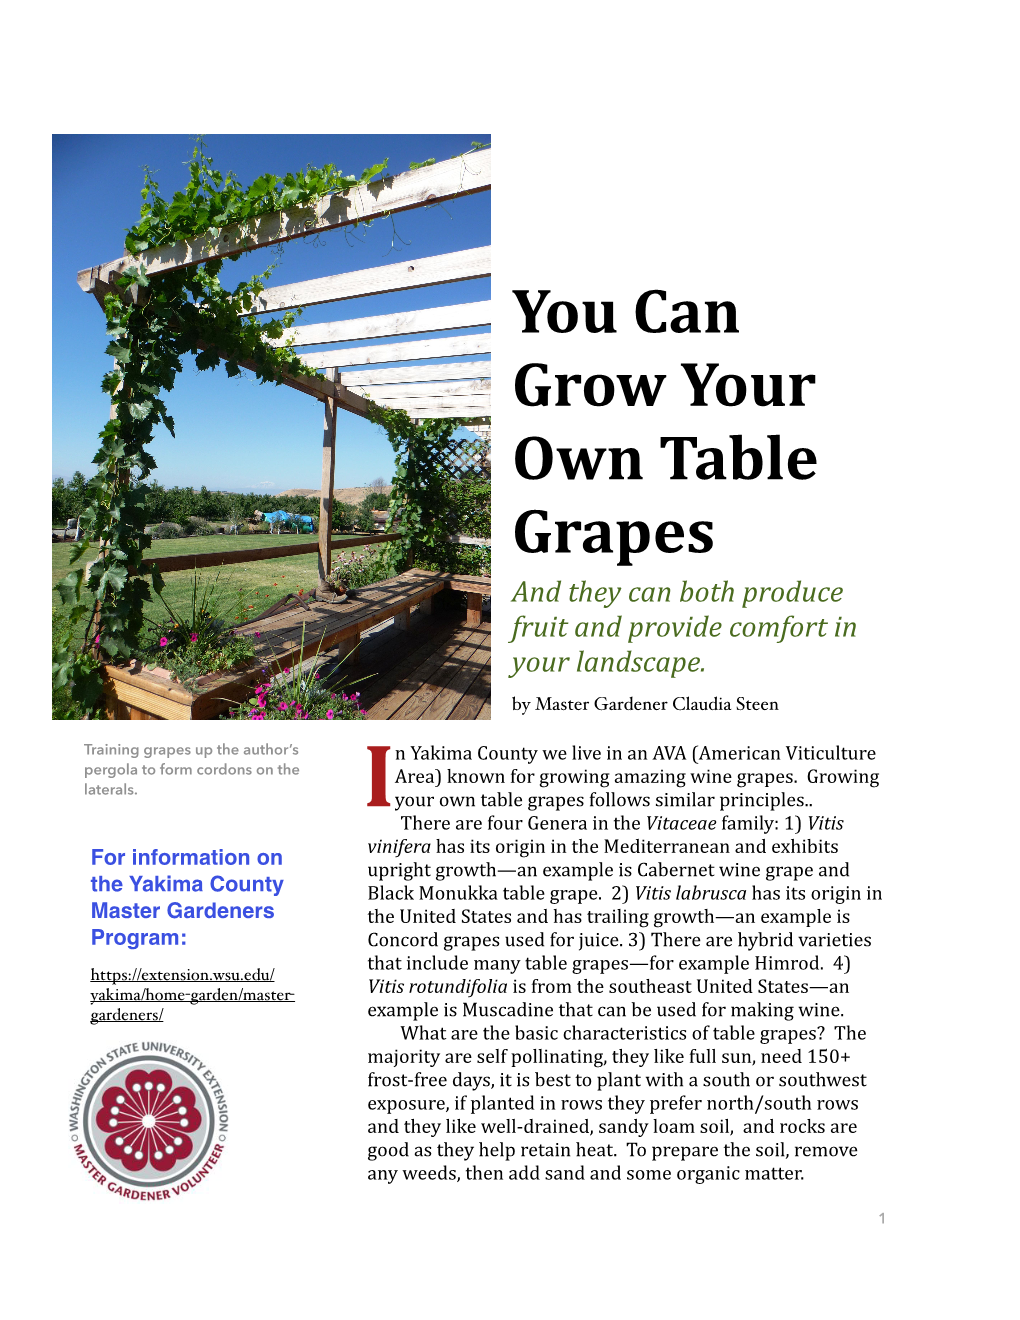 You Can Grow Your Own Table Grapes and They Can Both Produce Fruit and Provide Comfort in Your Landscape